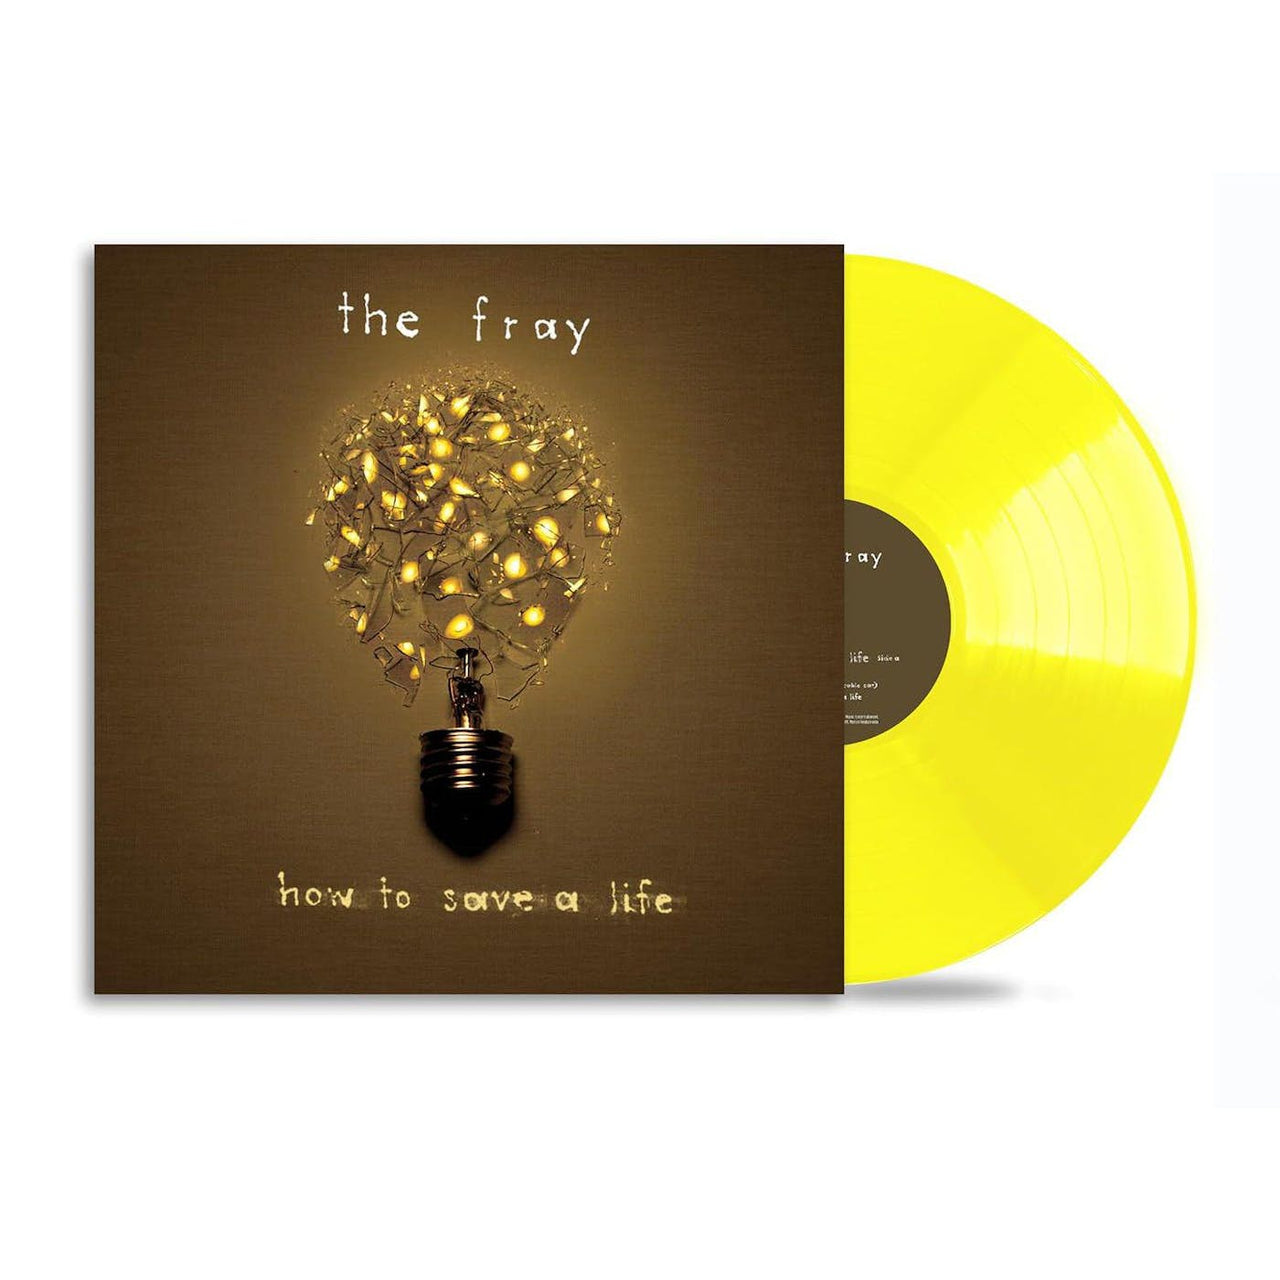 The Fray: How To Save A Life Vinyl LP (Yellow)